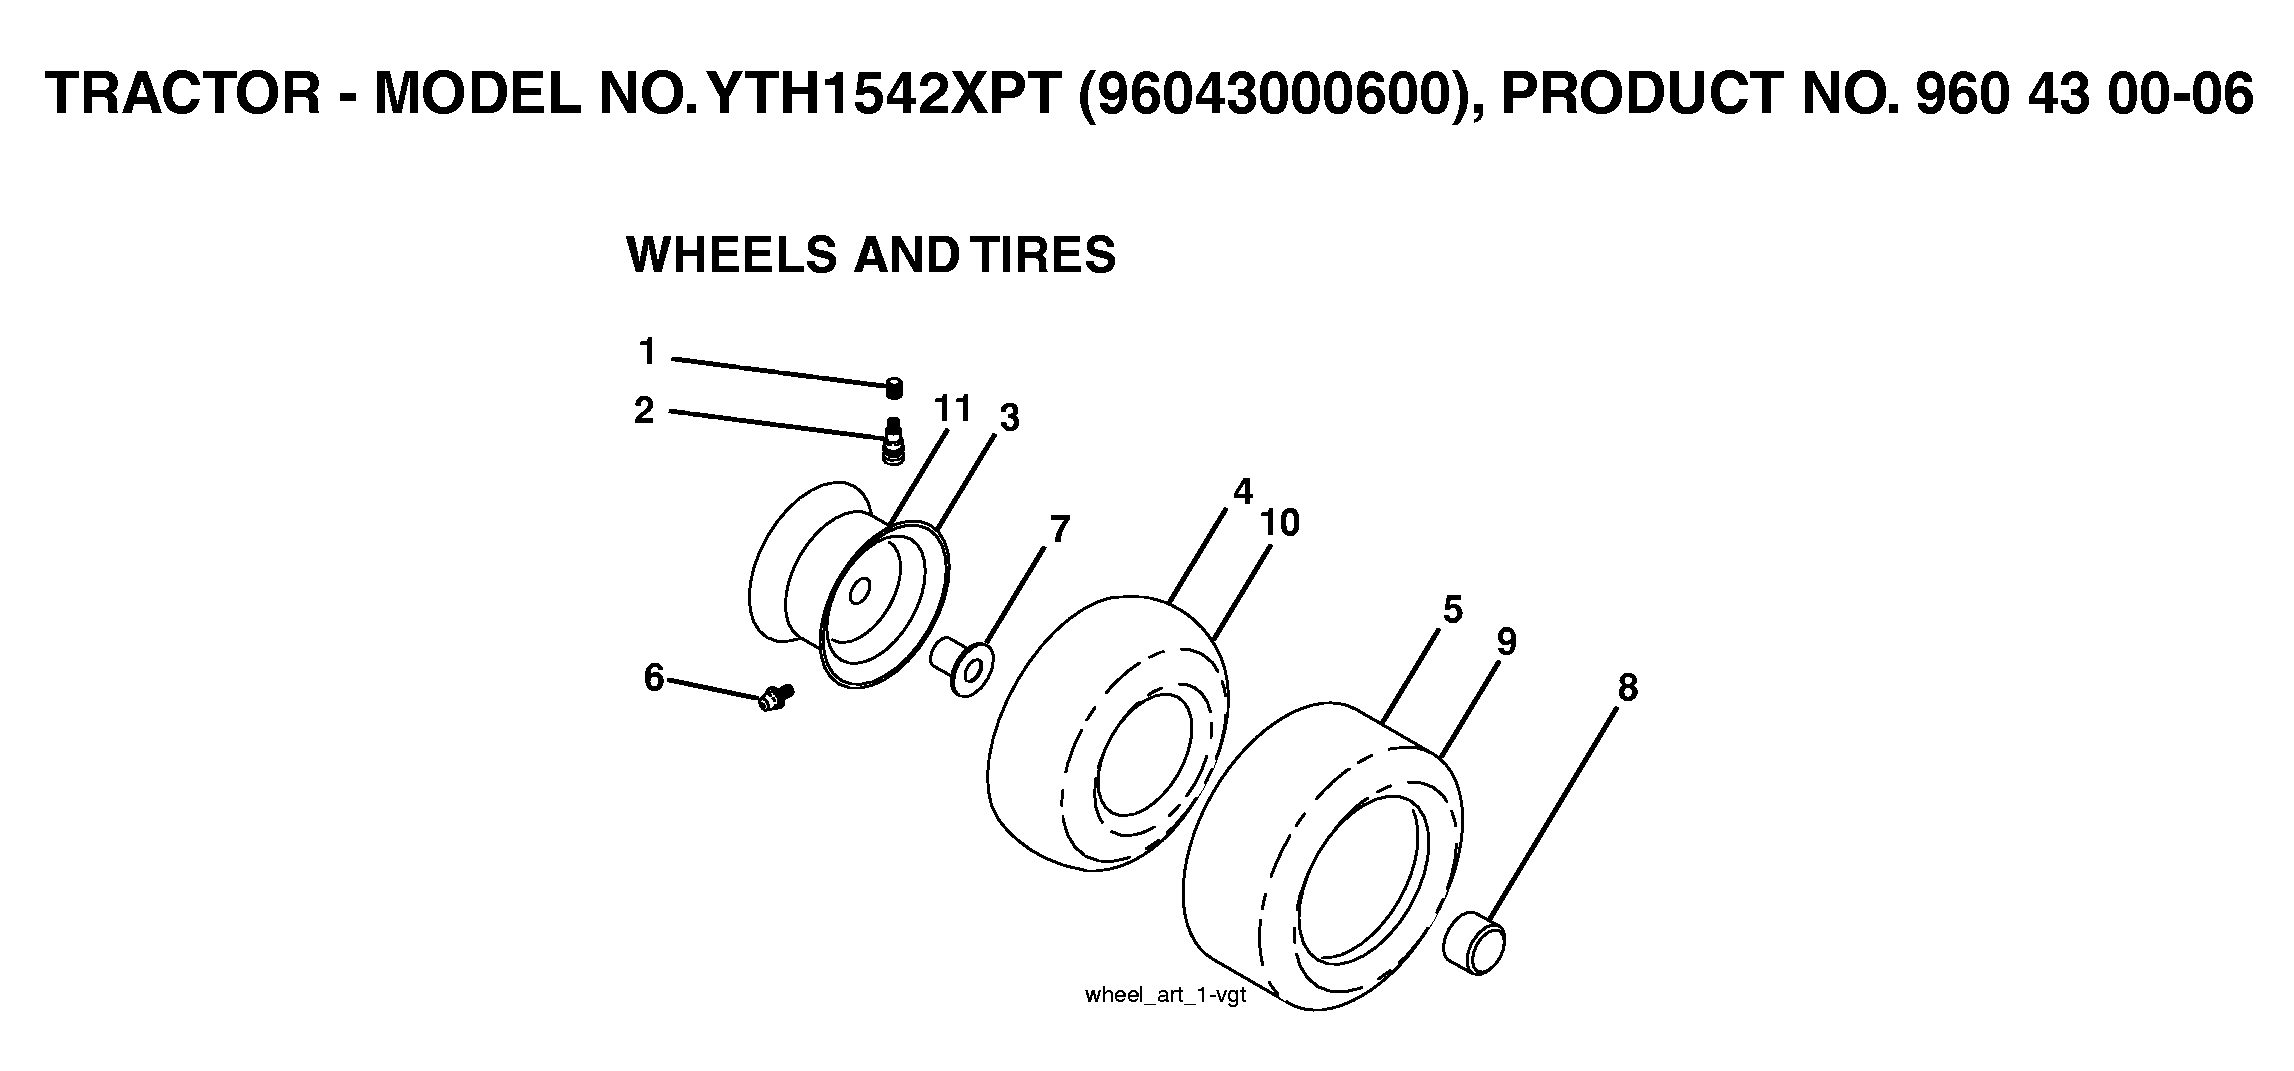 Wheels and tires 532059192, 532065139, 532106732, 532008134, 532122073, 532000278, 532009040, 532104757, 532125833, 532007154, 532106108, 576707201